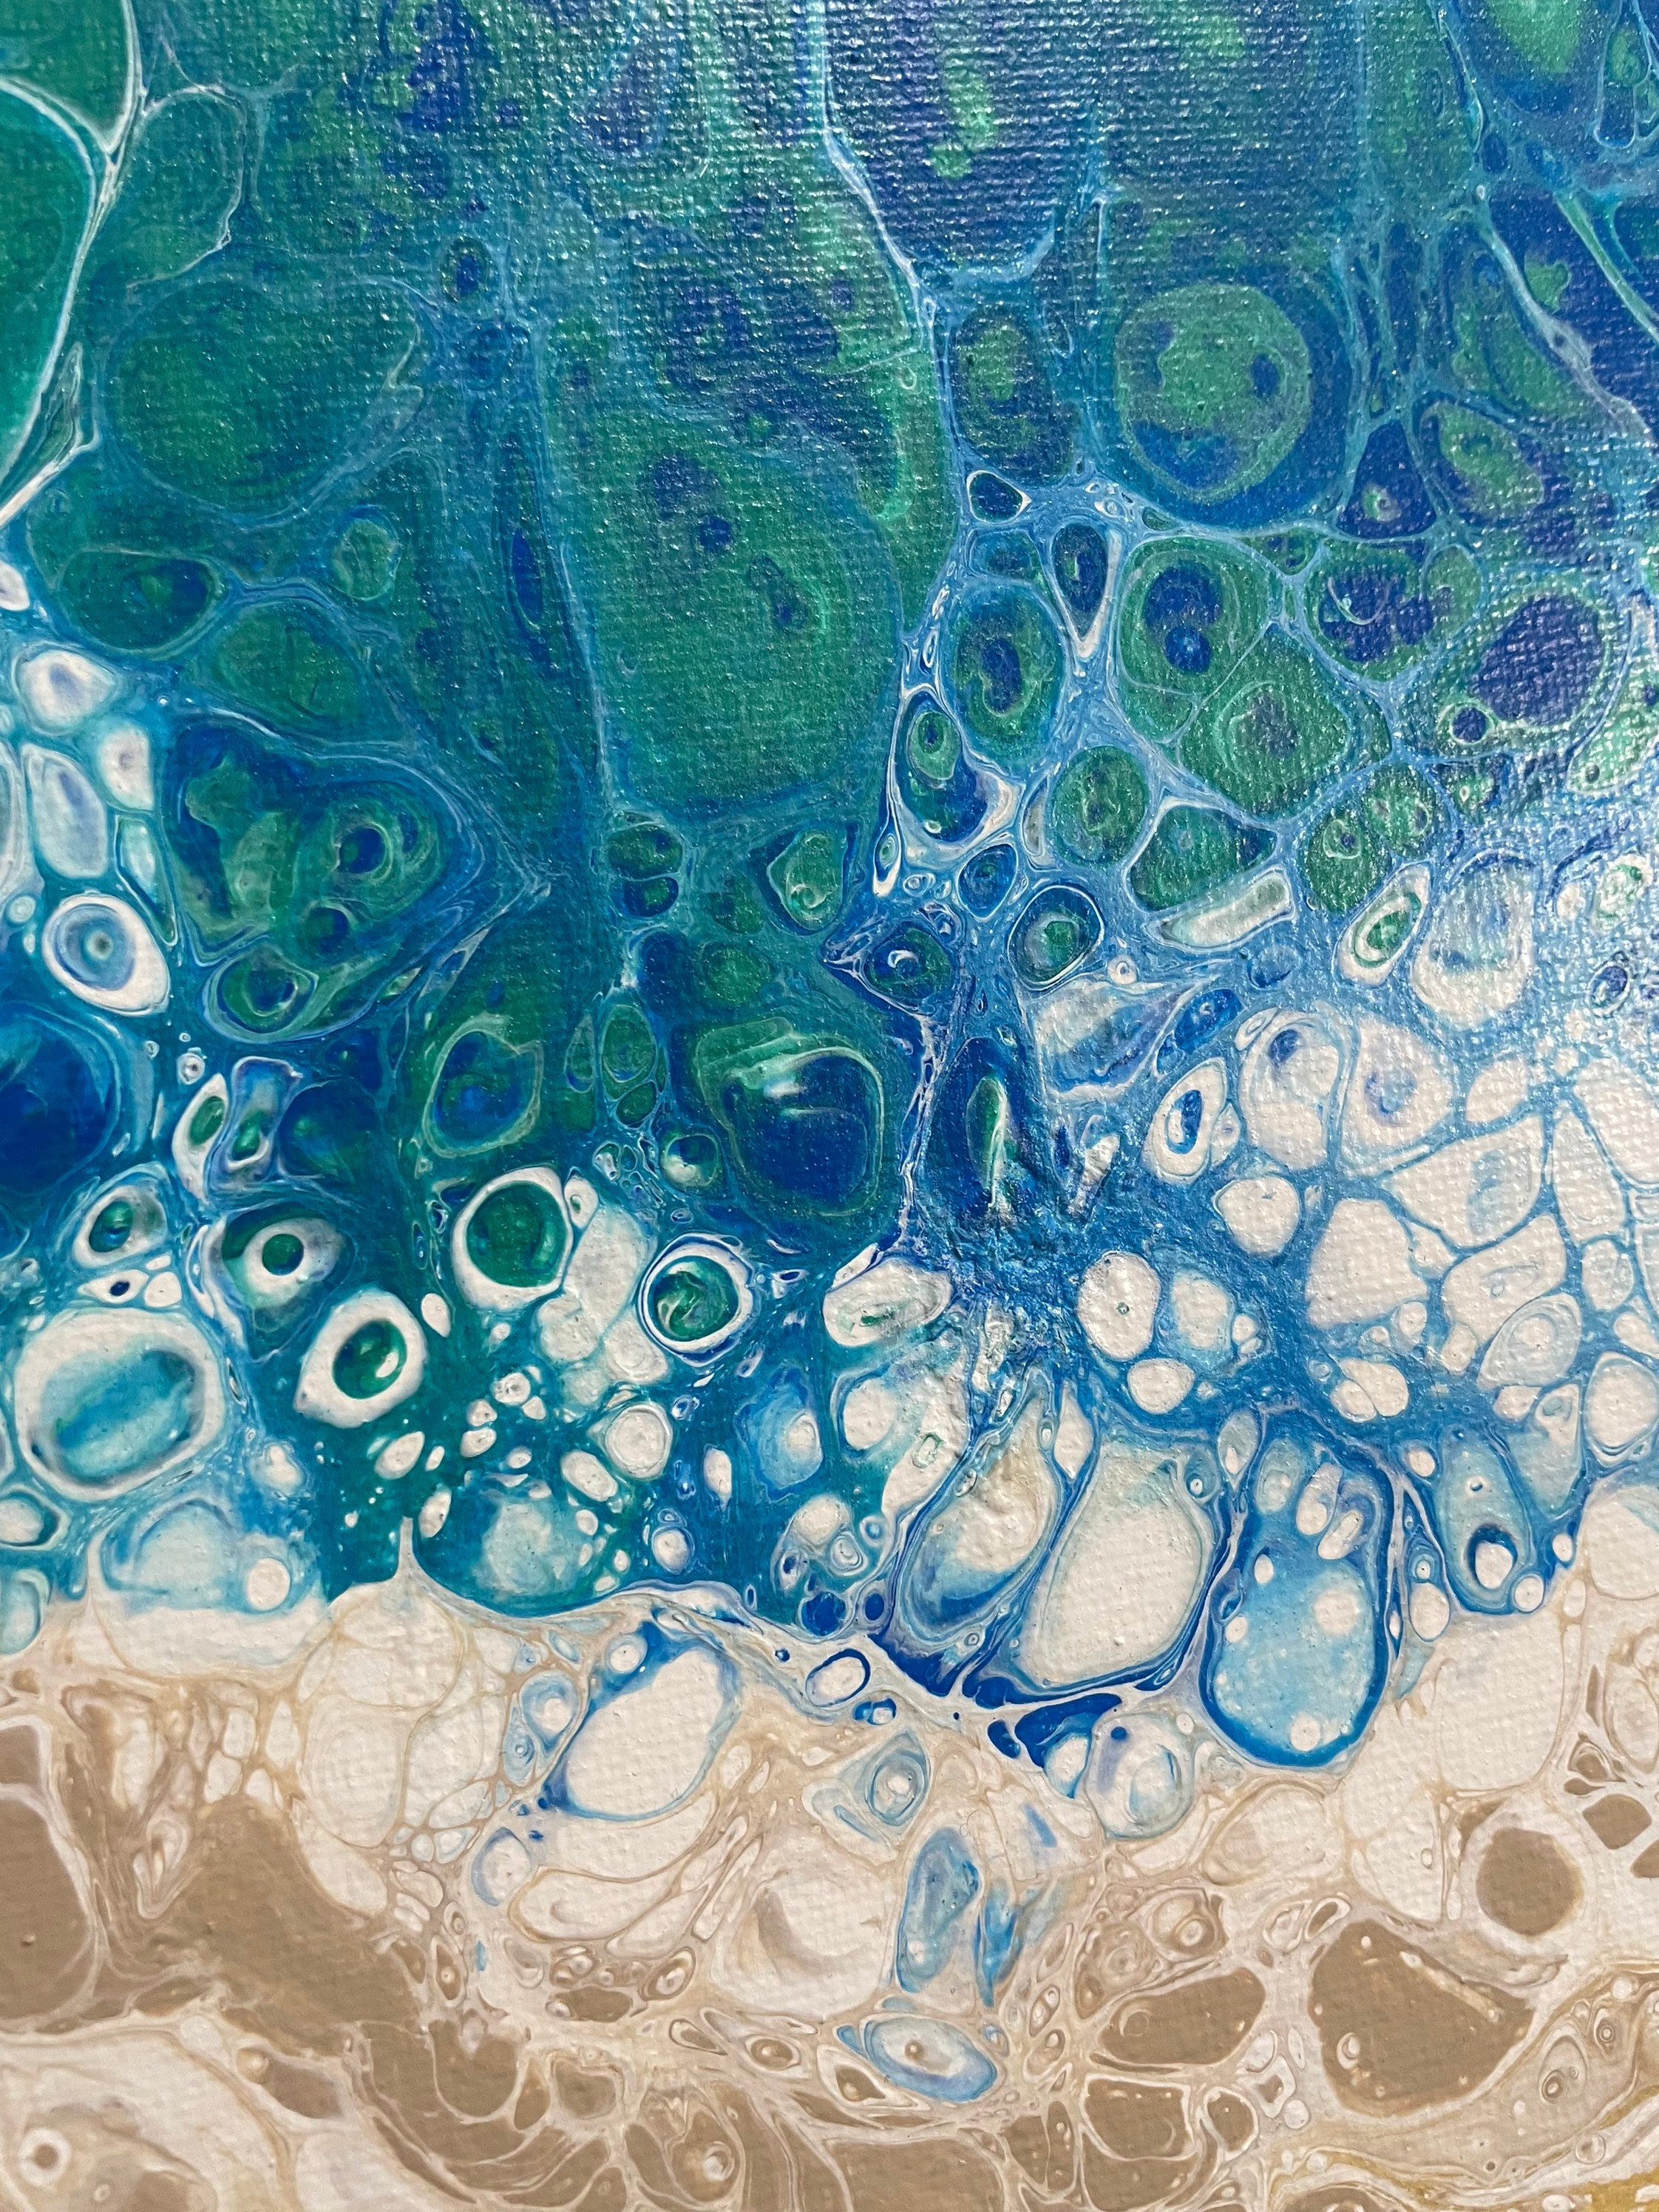 9 floetrol substitutes  Fluid acrylic painting, Acrylic pouring